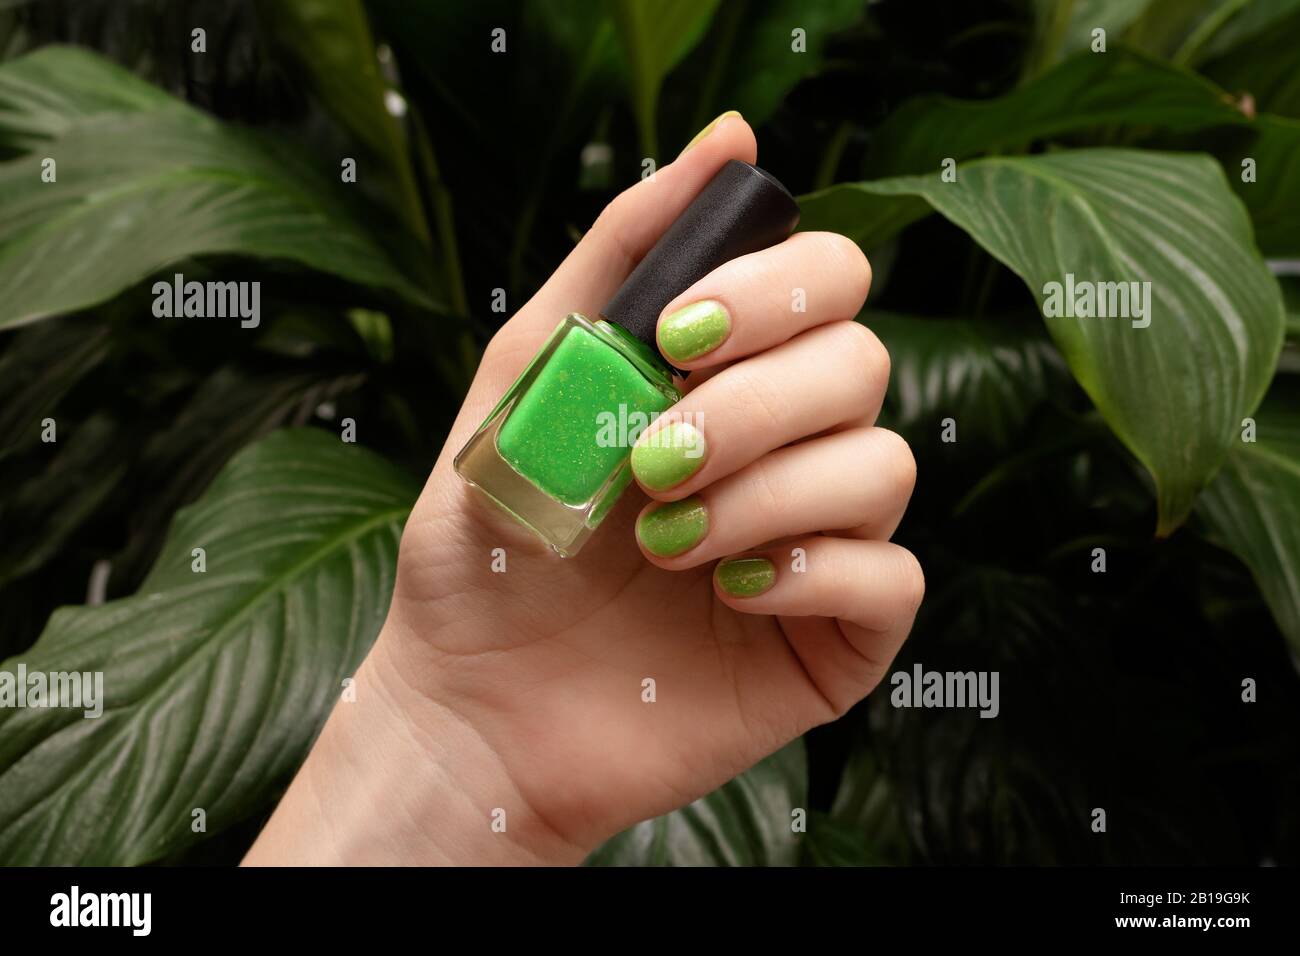 Female hand with green nail design holding nail polish bottle Stock Photo